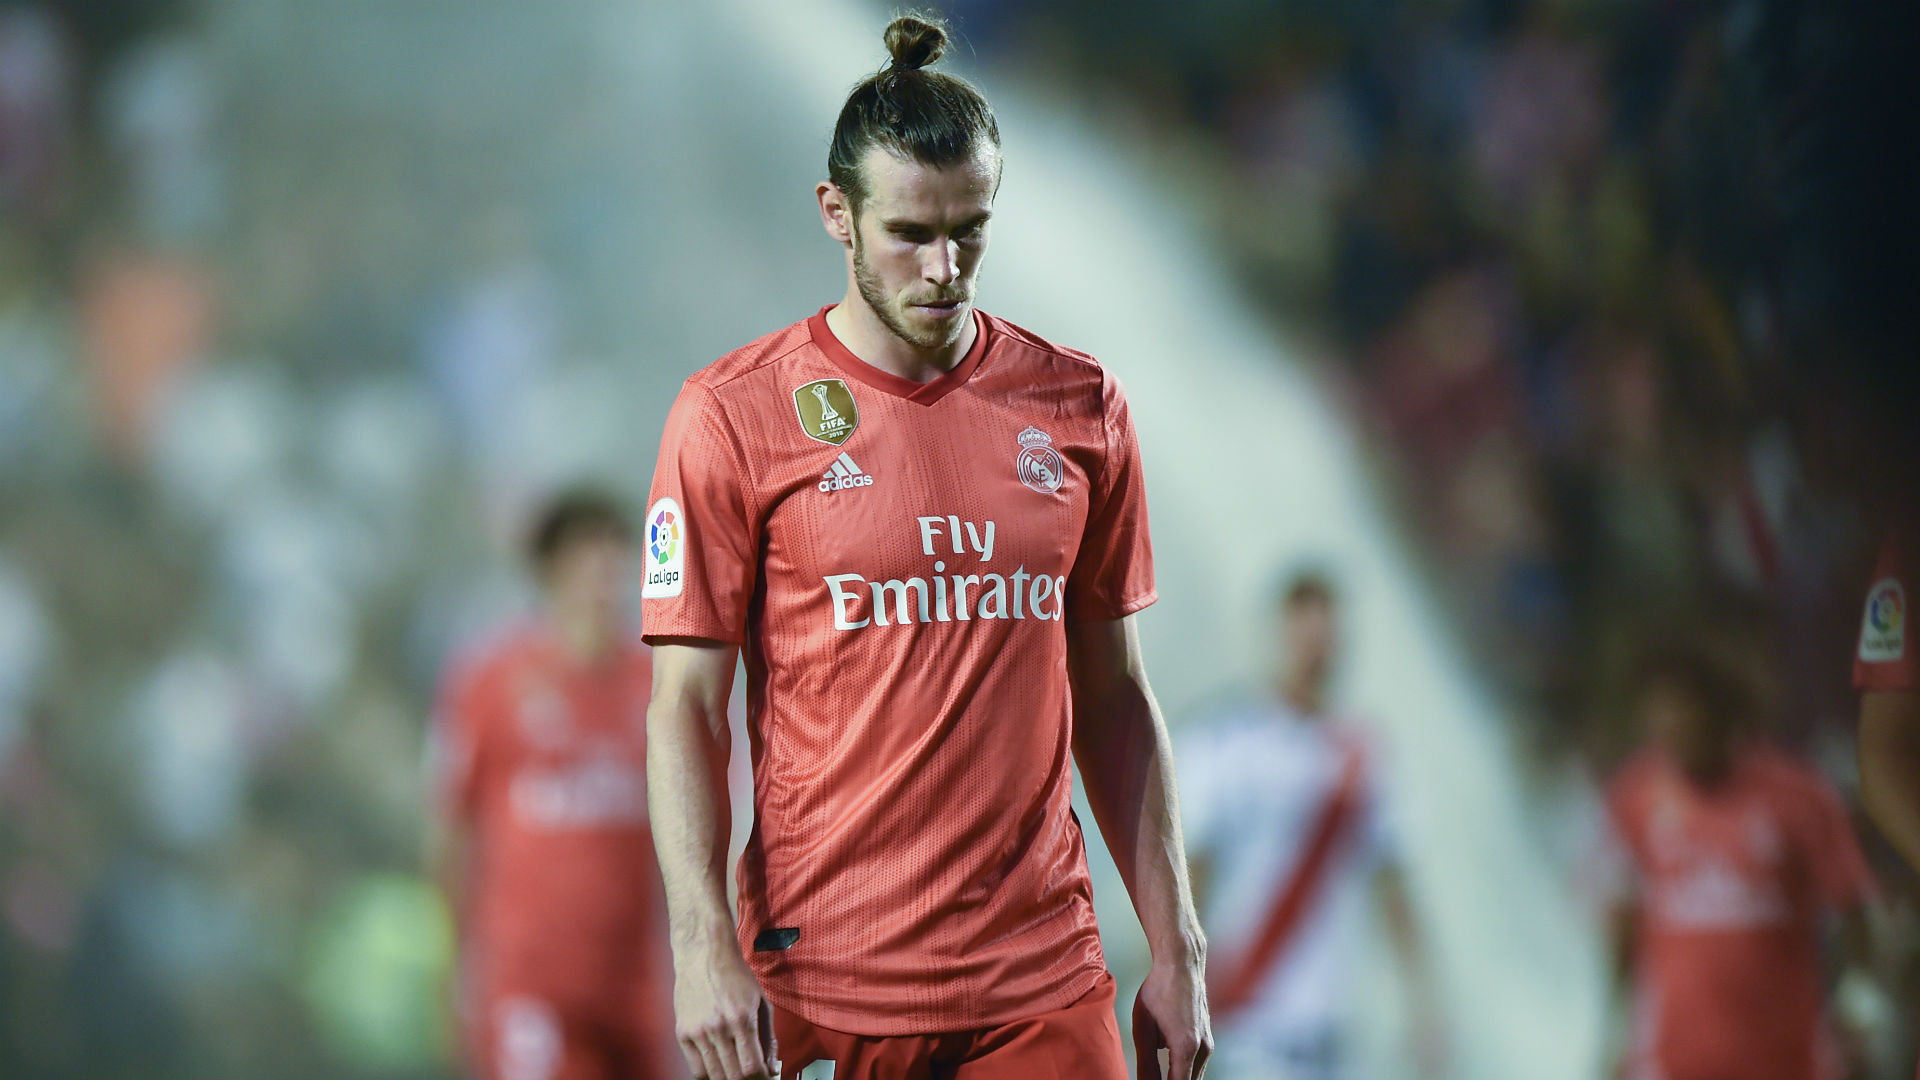 Real Madrid are reportedly open to Gareth Bale leaving, but his agent doubts Manchester United are an option and he will not approve a loan.